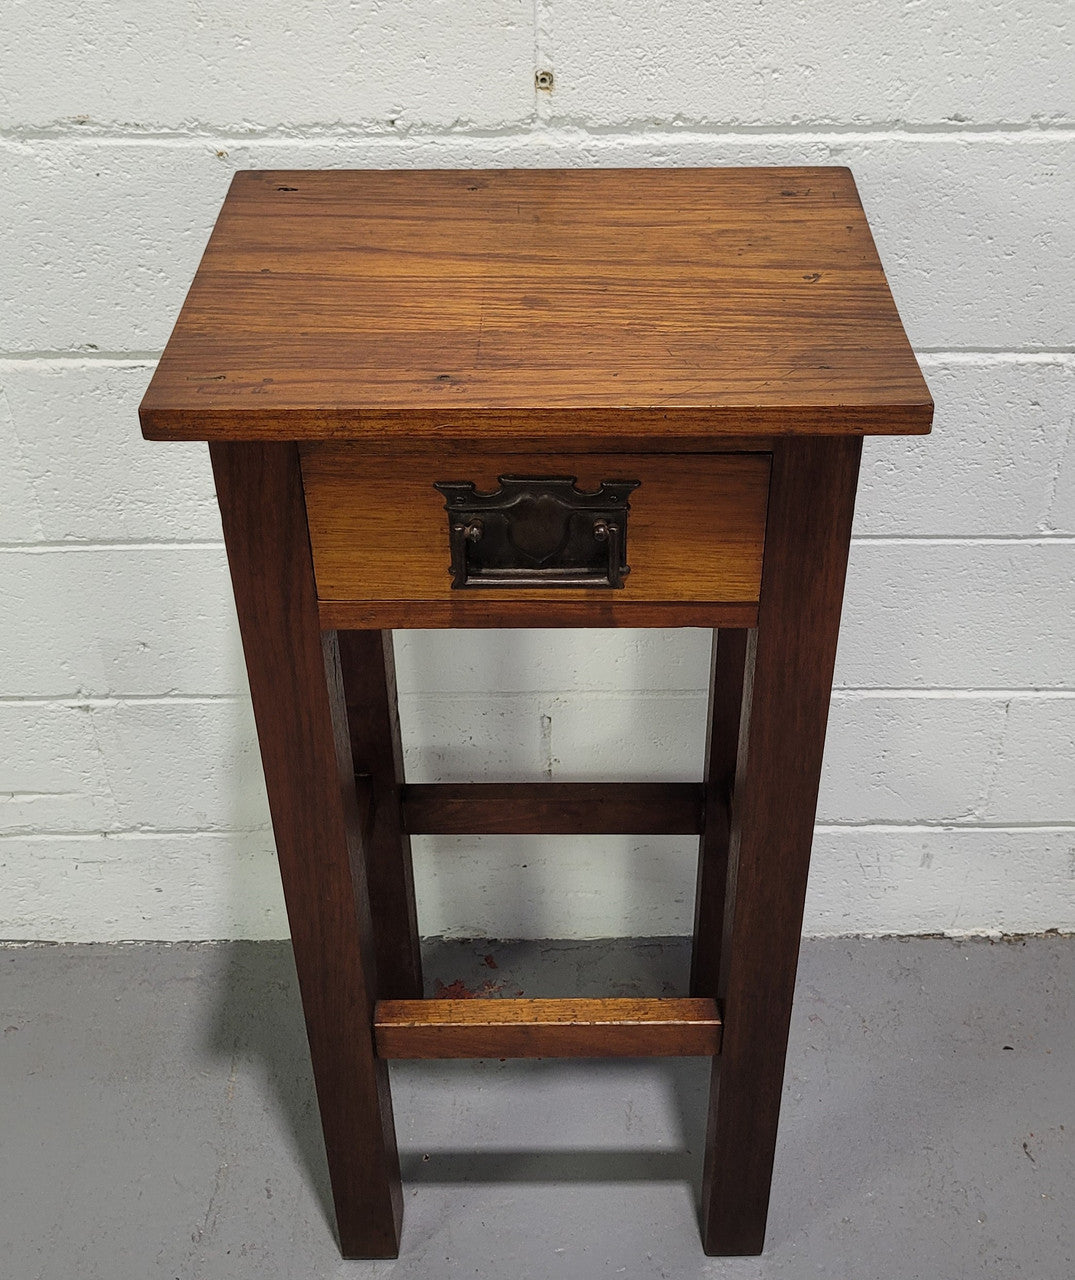 Small Arts and Crafts side table/bedside table. With drawer and is in good original detailed condition.